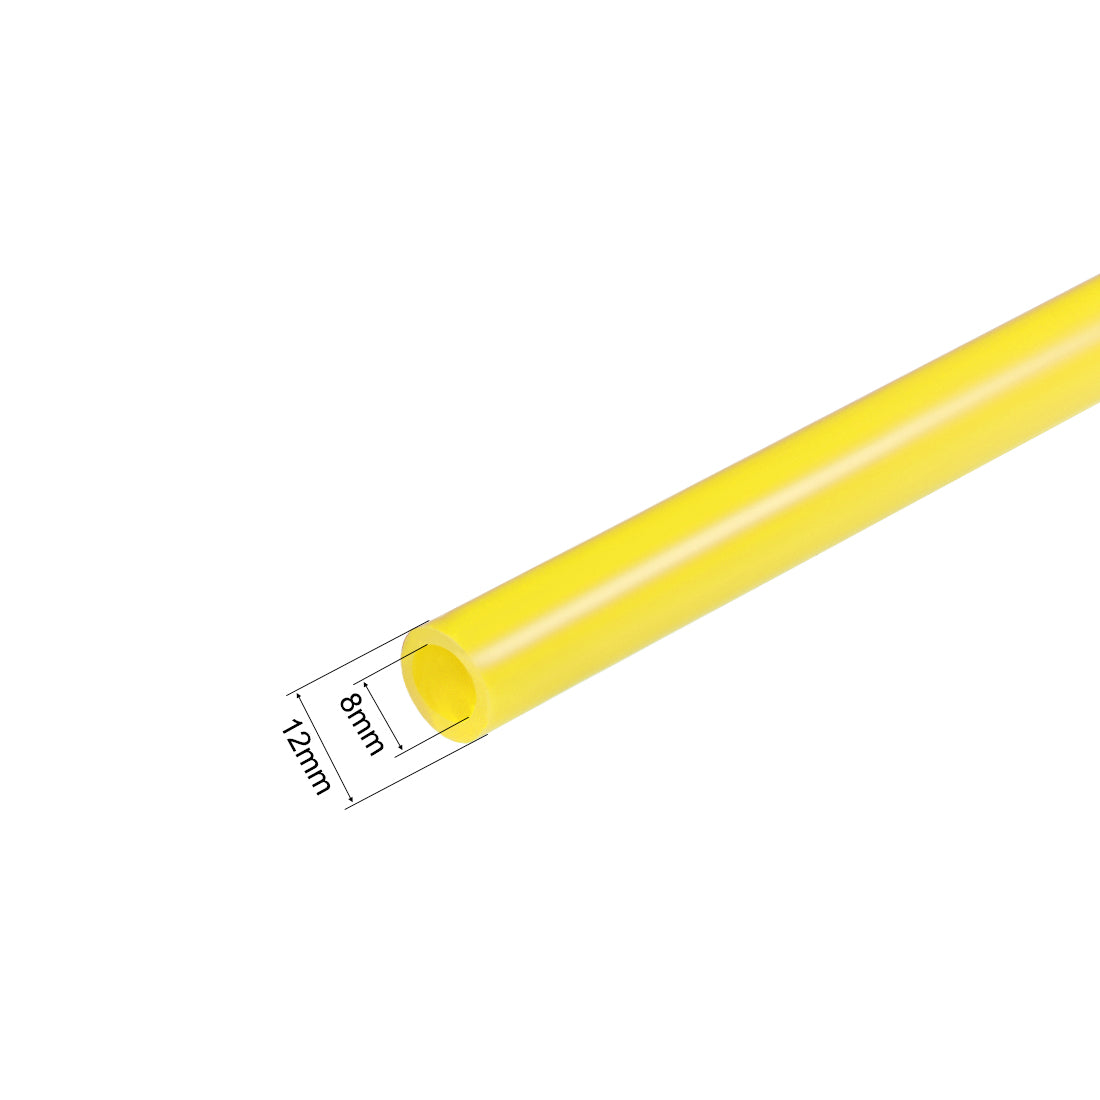 Uxcell Uxcell Silicone Tubing, 5/16 inch ID x 1/2 inch OD 3.3ft Rubber Tube High Temp, Yellow